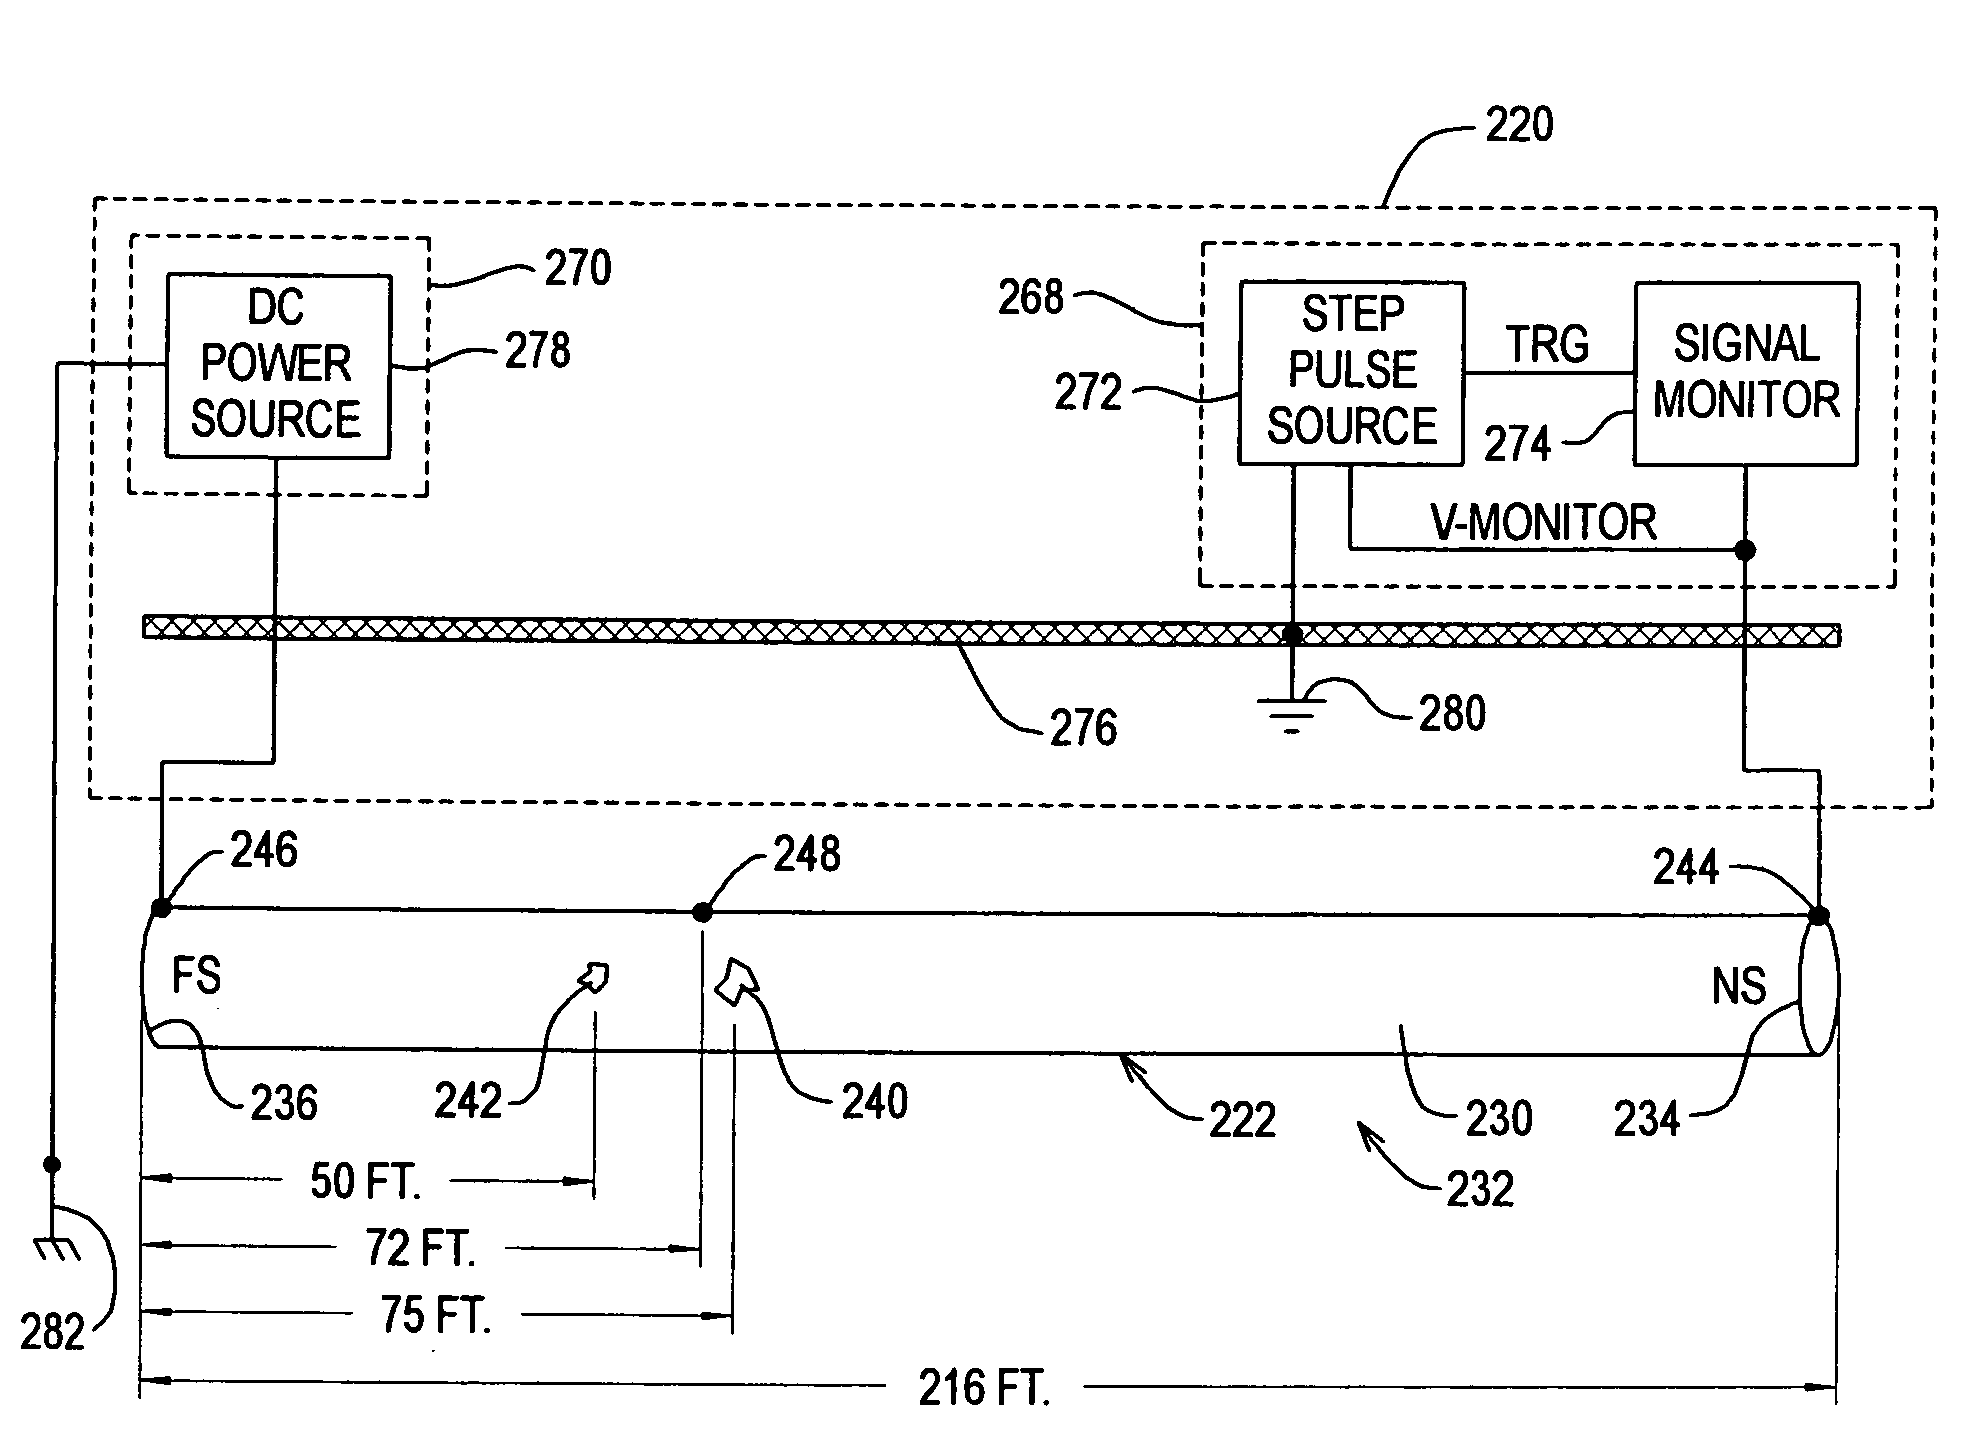 Systems and methods for testing conductive members employing electromagnetic back scattering